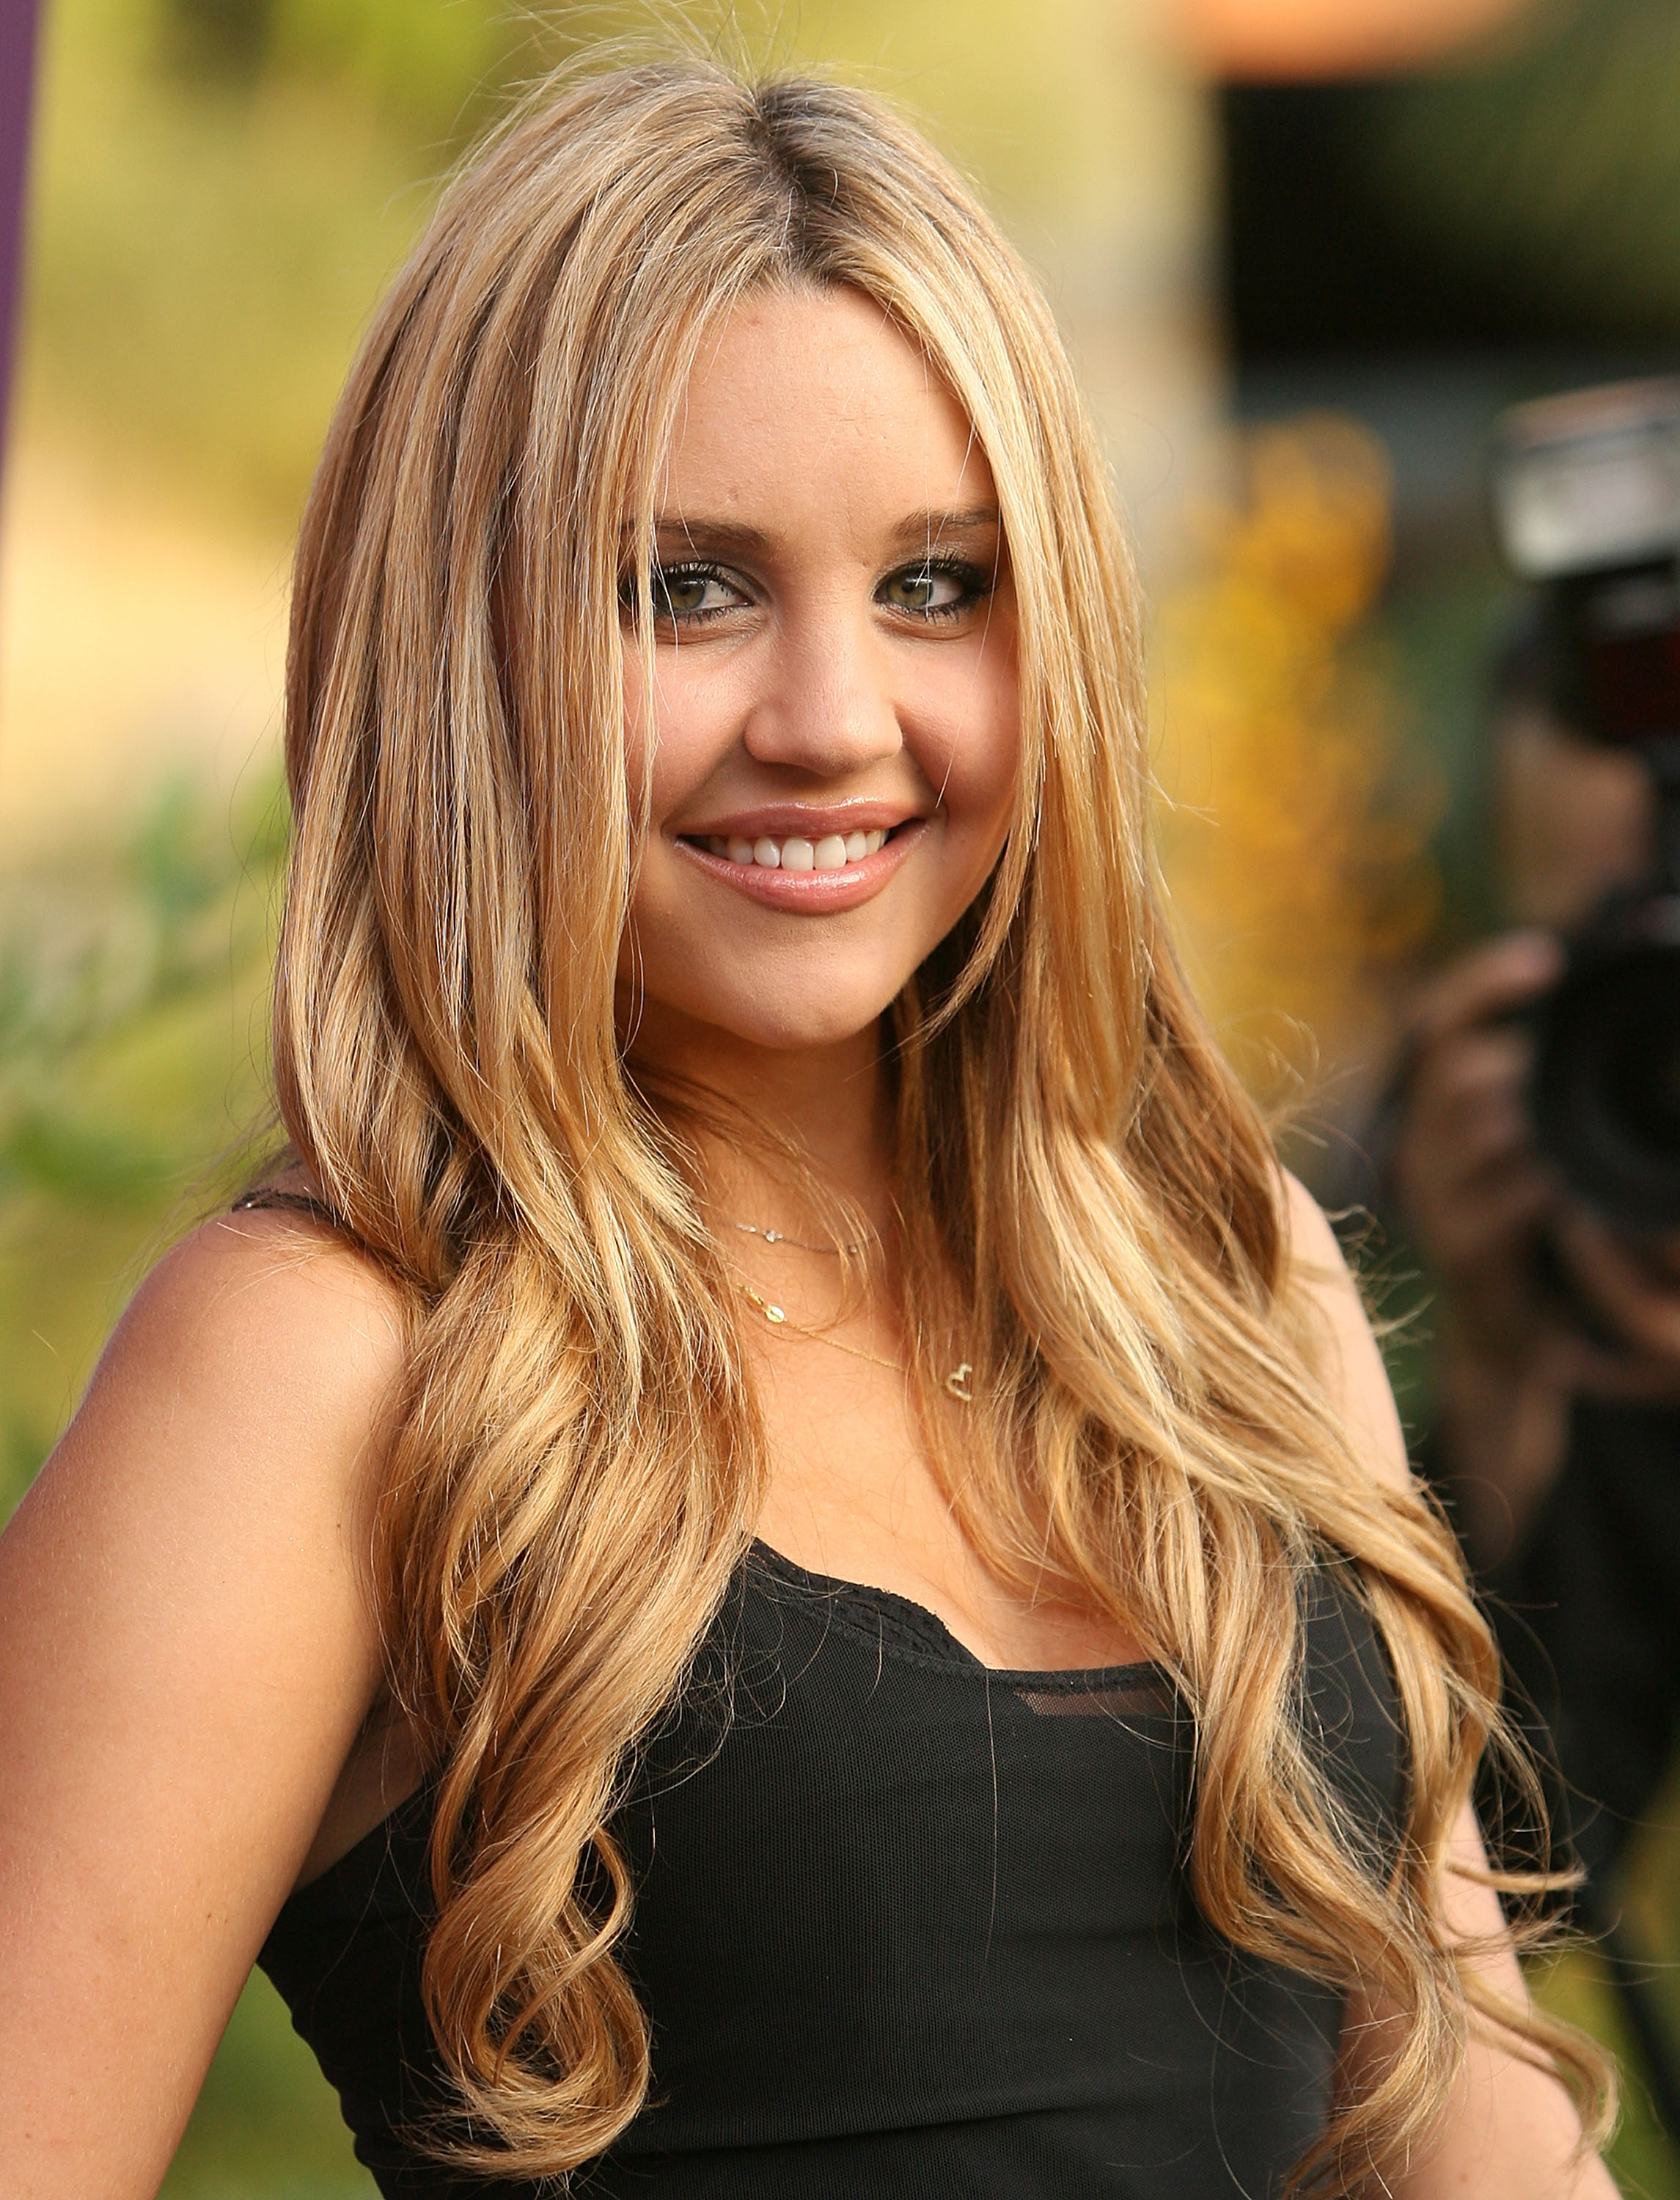 Amanda Bynes at the 8th Annual Chrysalis Butterfly Ball on June 6, 2009, in Los Angeles, California | Source: Getty Images